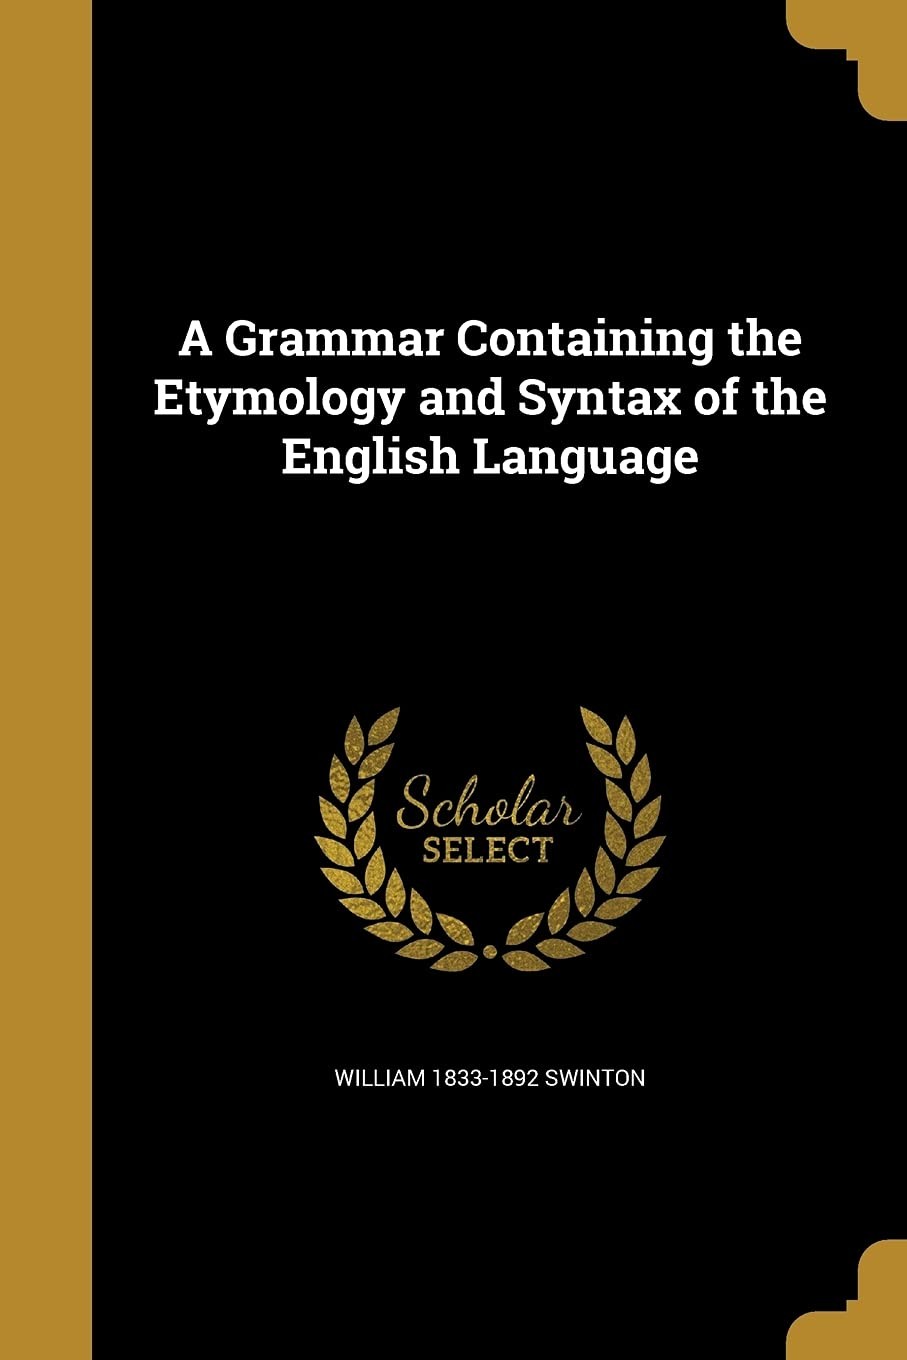 Grammar Containing the Etymology and Syntax the English Language